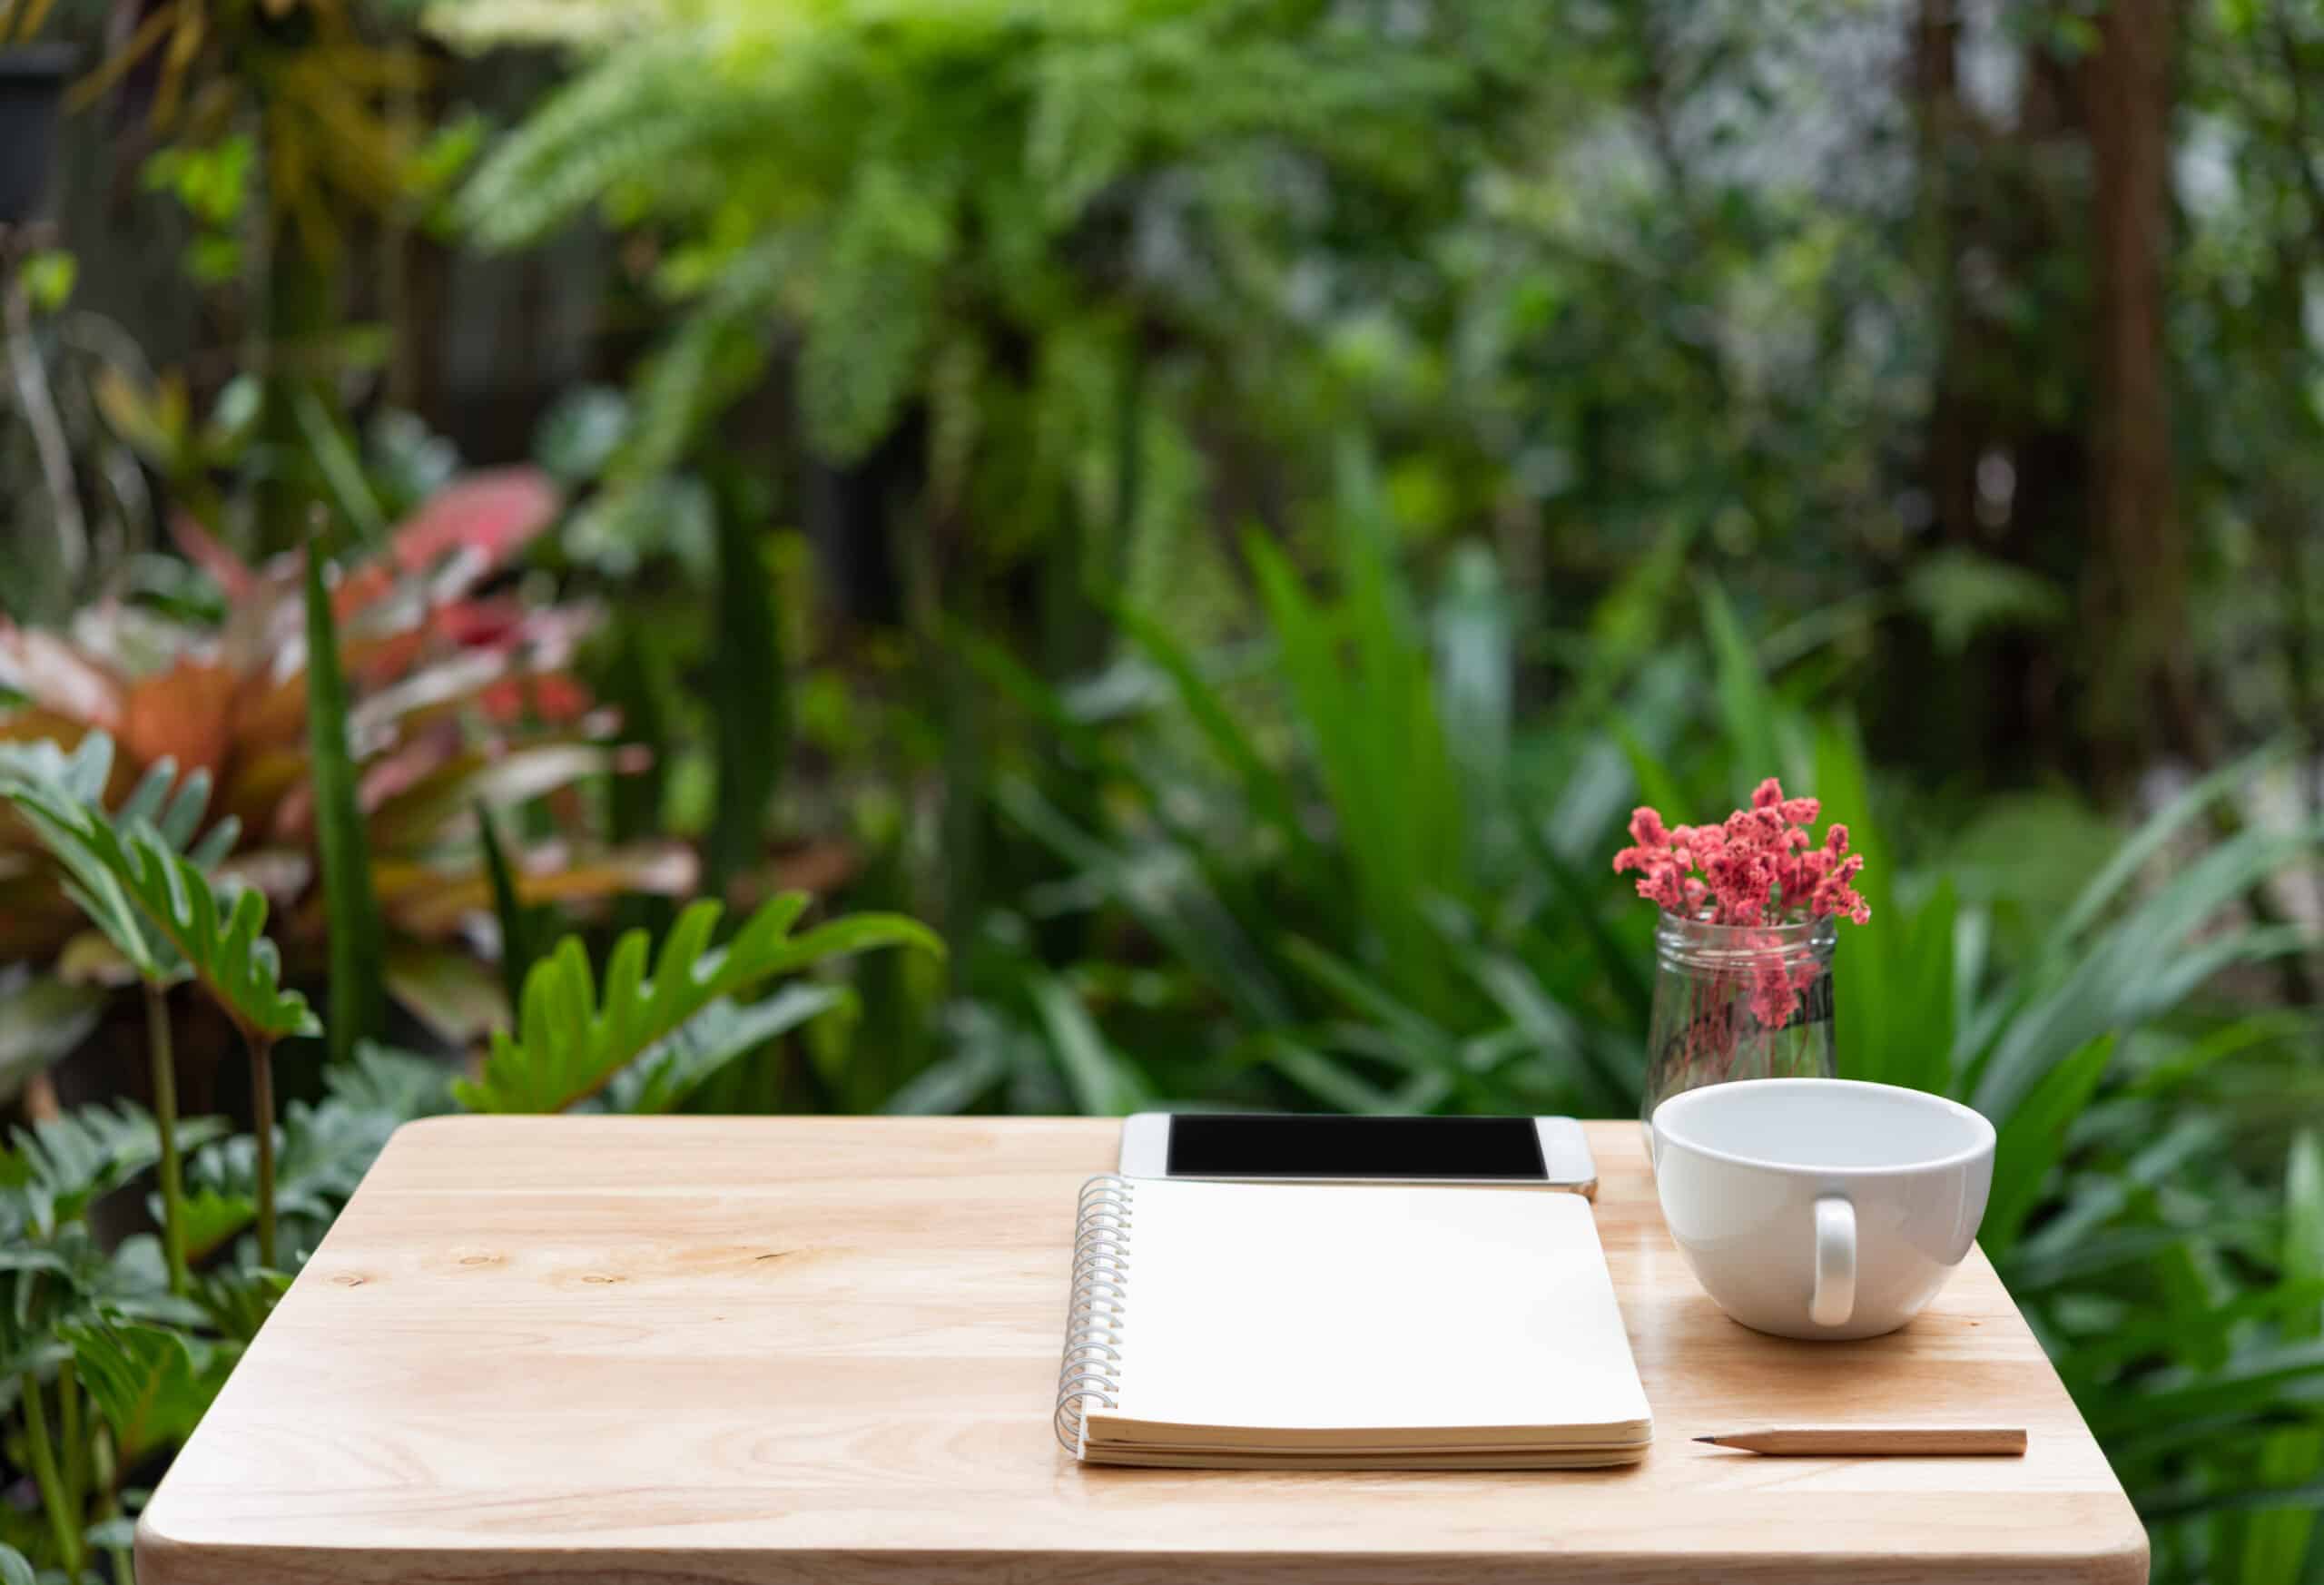 wooden desk outdoors with notebook,pencil, and white coffee cup